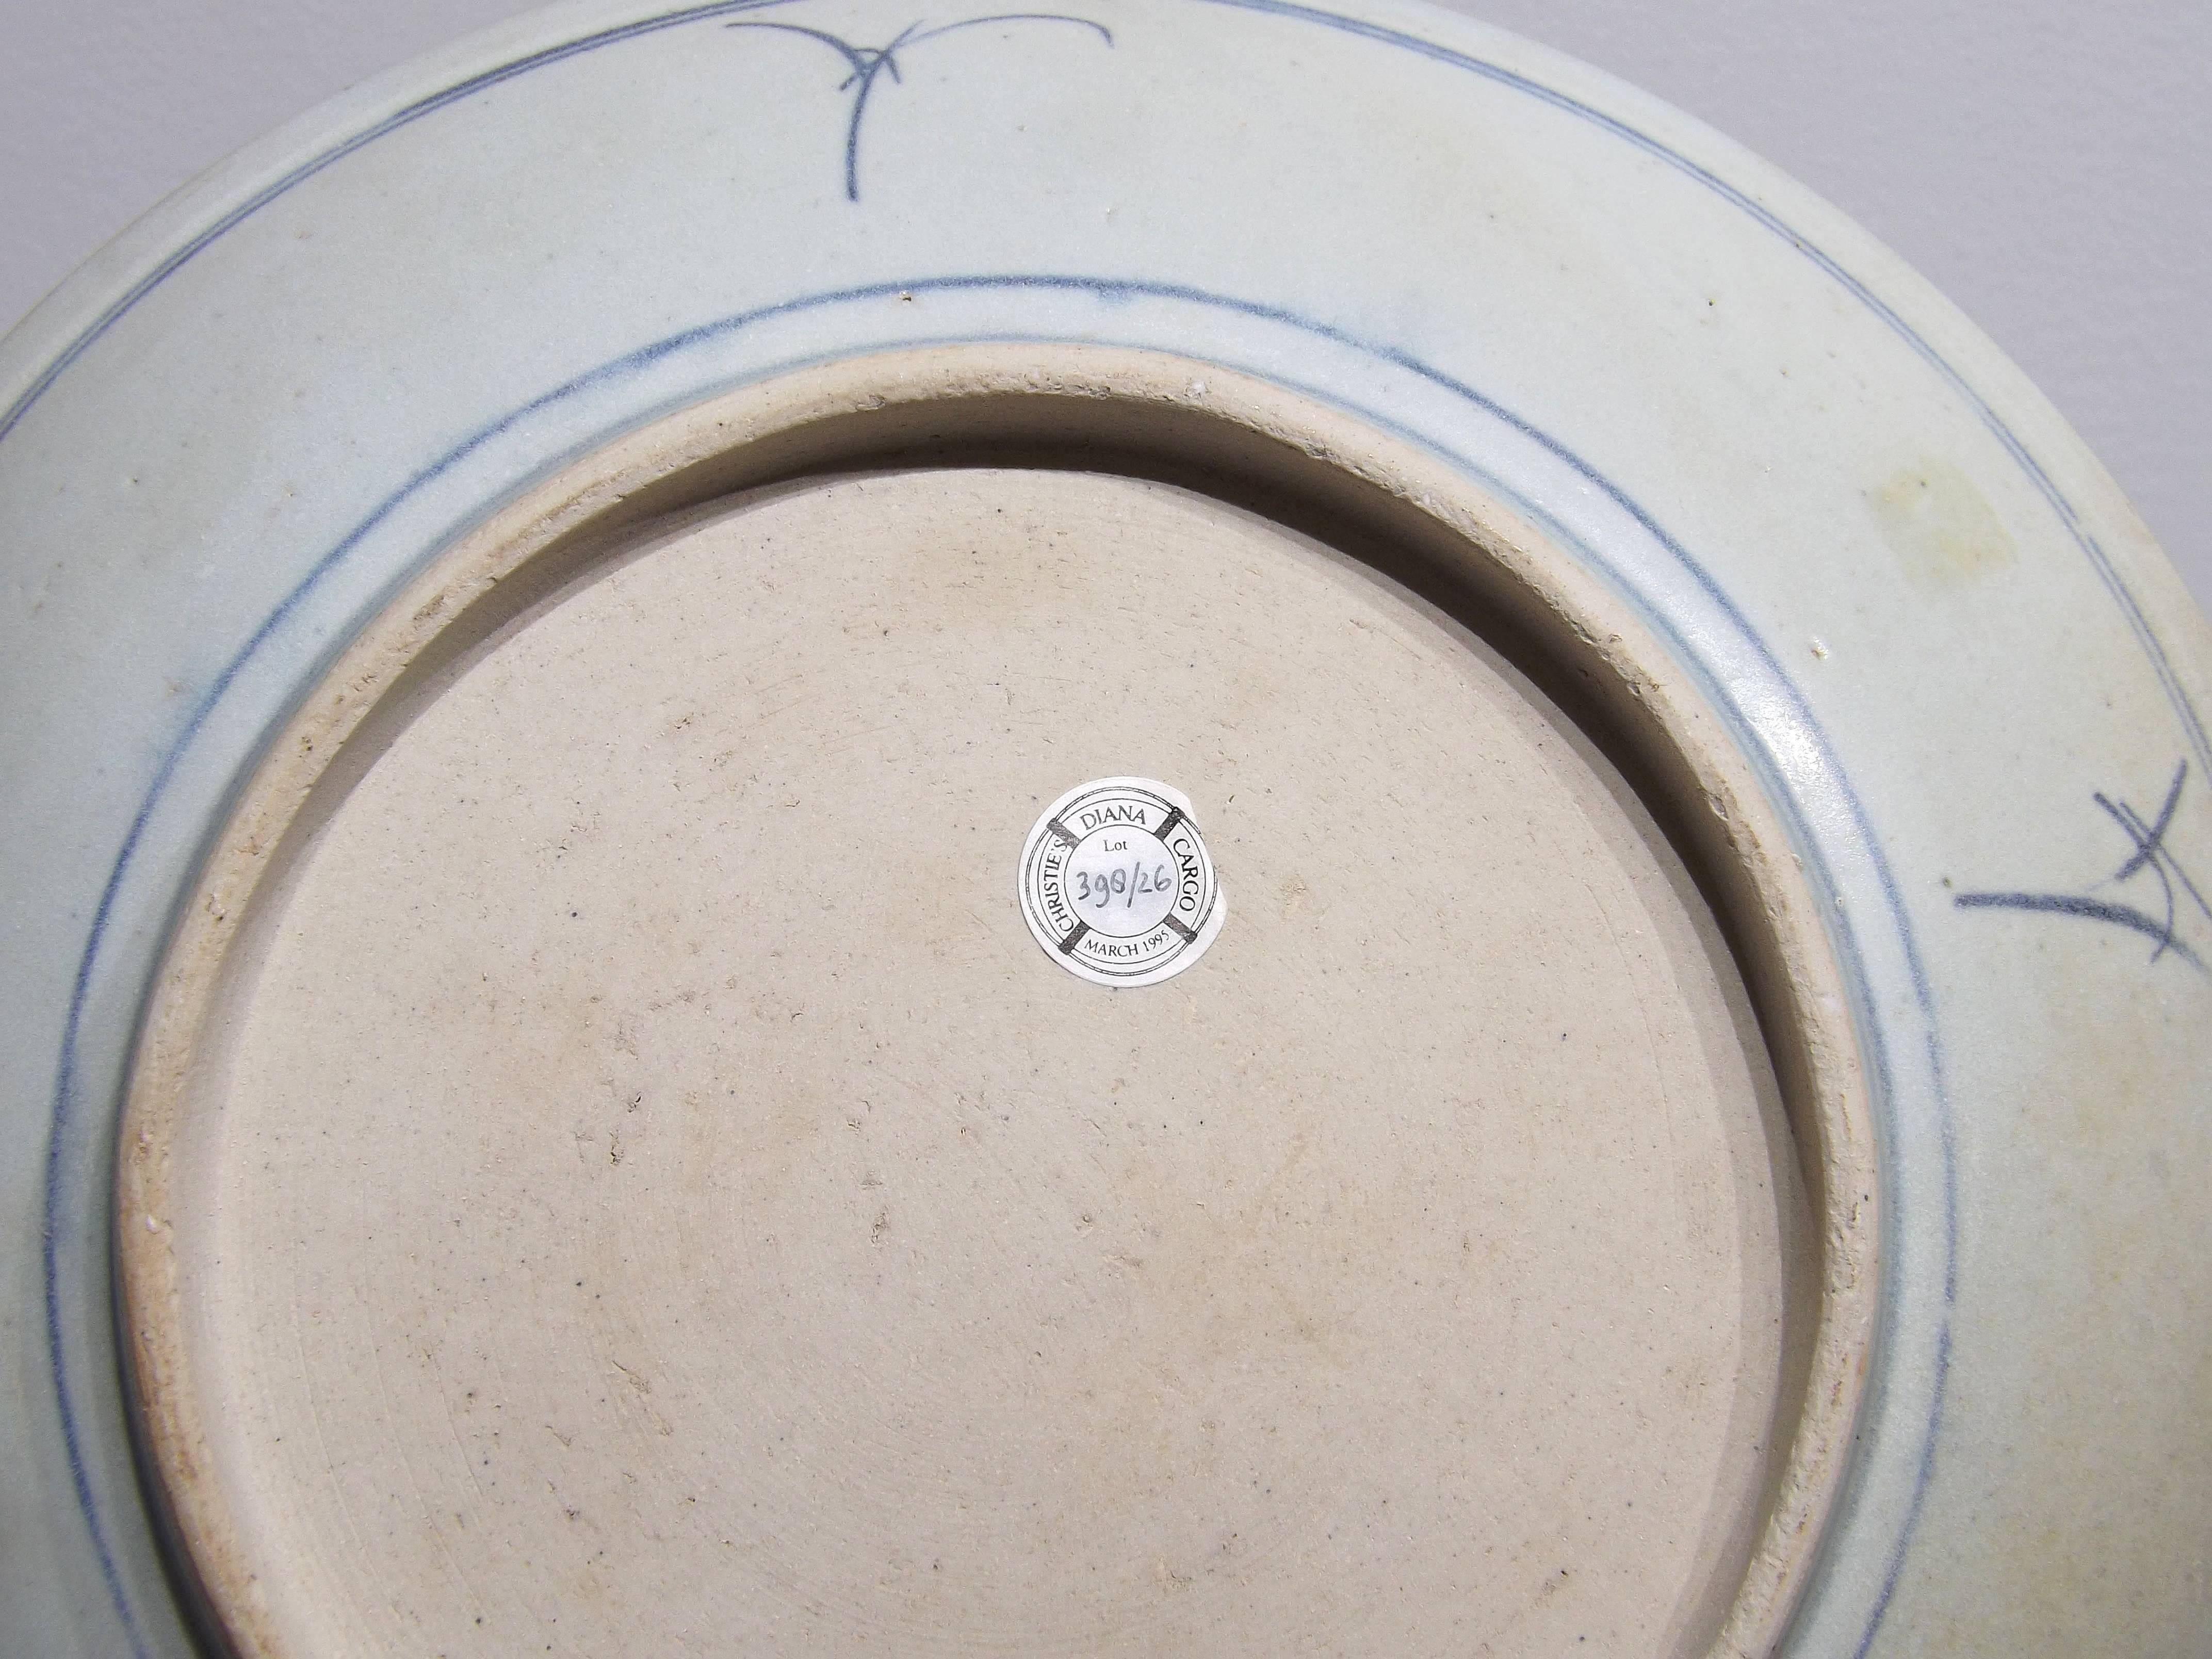 Early 19th Century Chinese Qing Period Shipwreck Plate from the 'Diana'